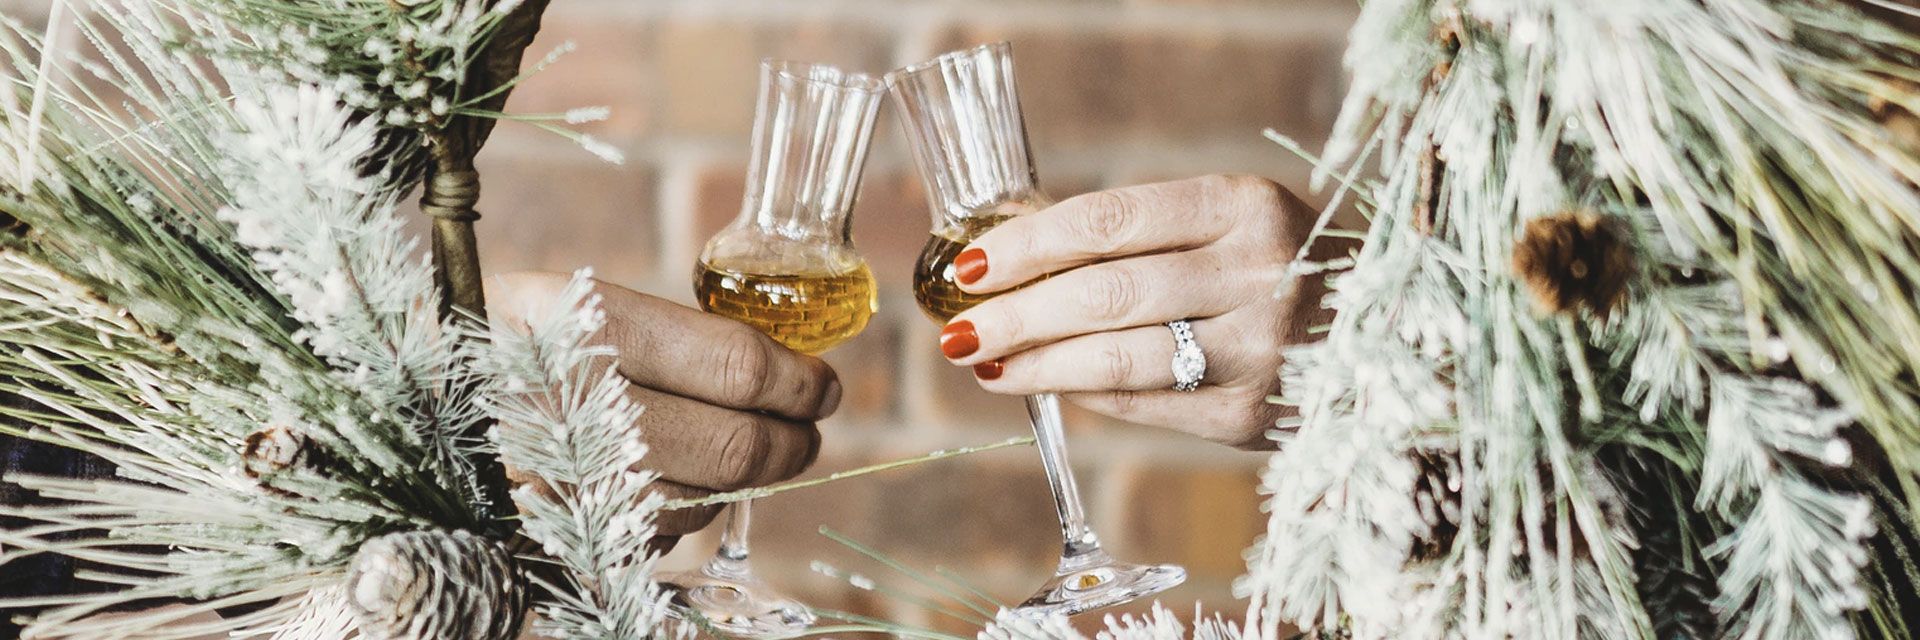 mand and woman's hands clinking icewine glasses